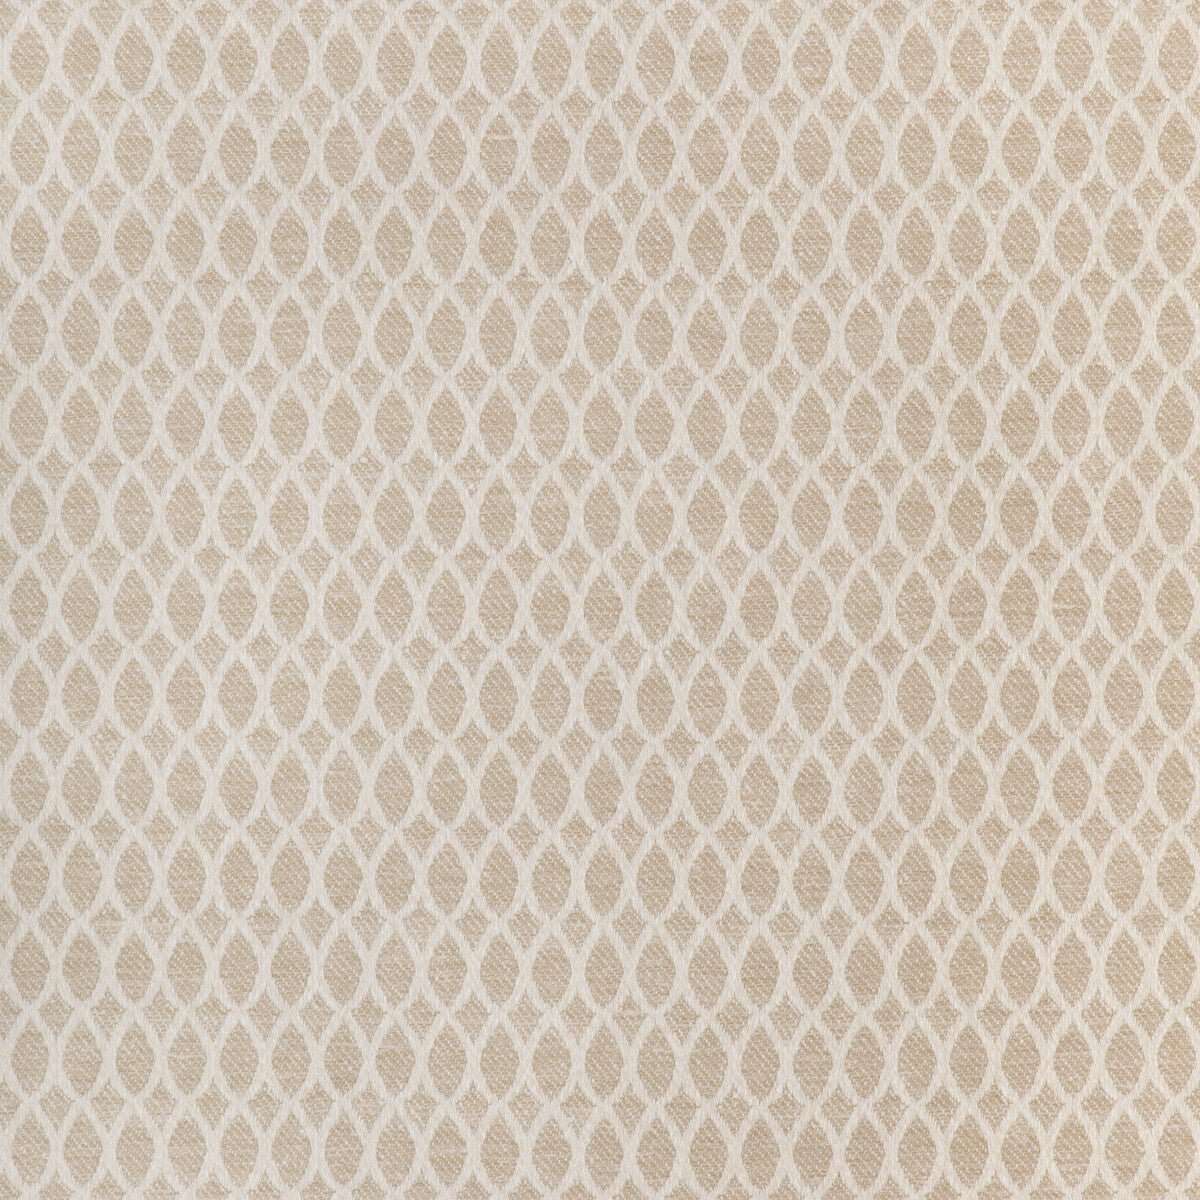 Kravet Design fabric in 37114-16 color - pattern 37114.16.0 - by Kravet Design in the Woven Colors collection